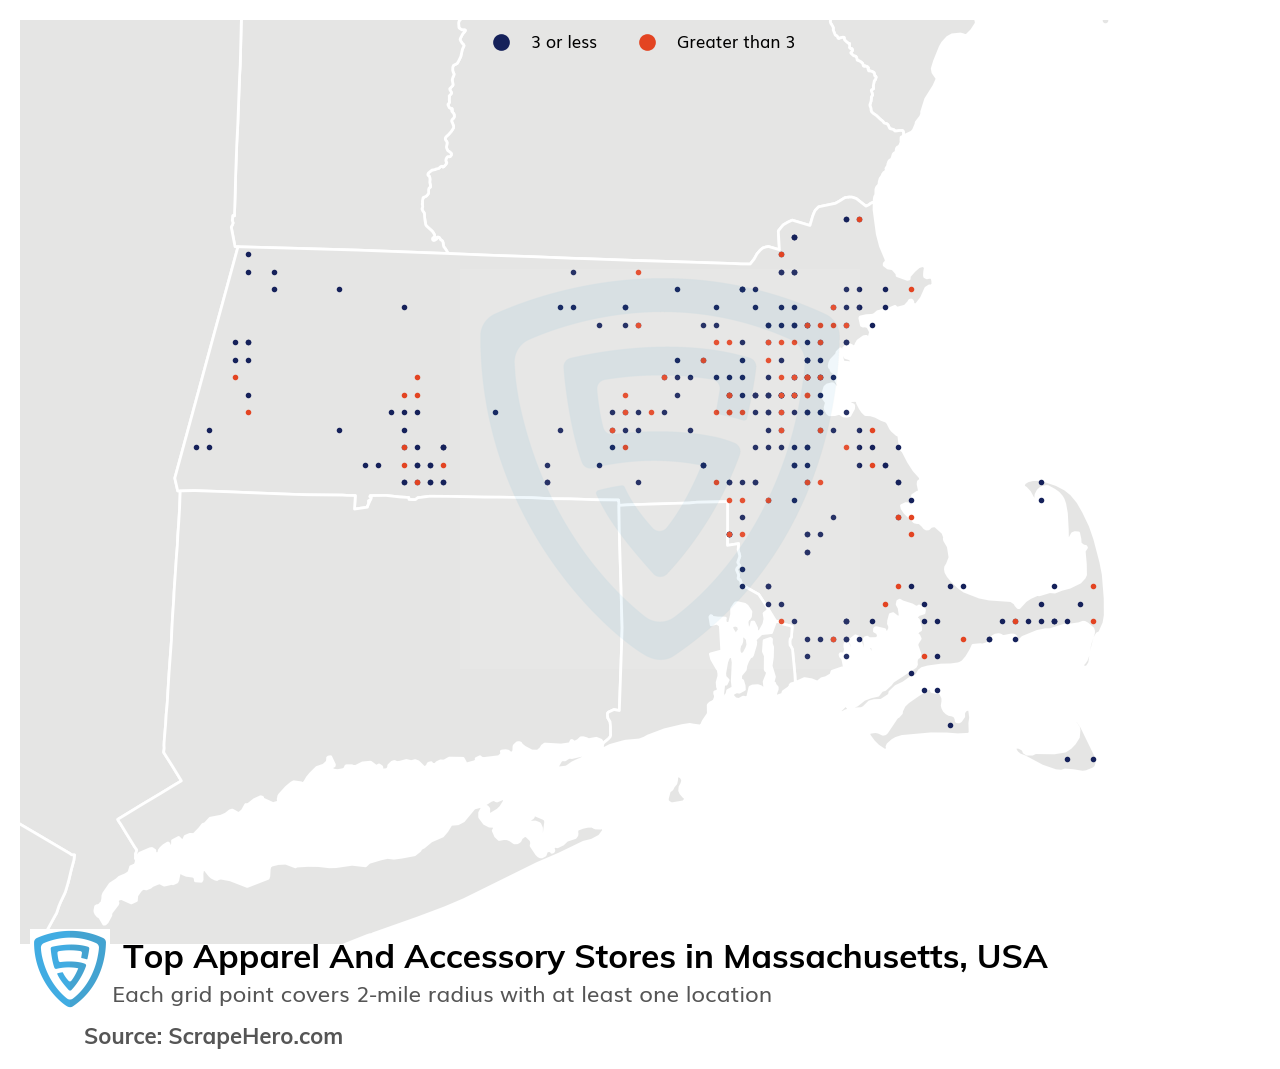 Map of 10 Largest apparel & accessory stores in Massachusetts in 2023 Based on Locations